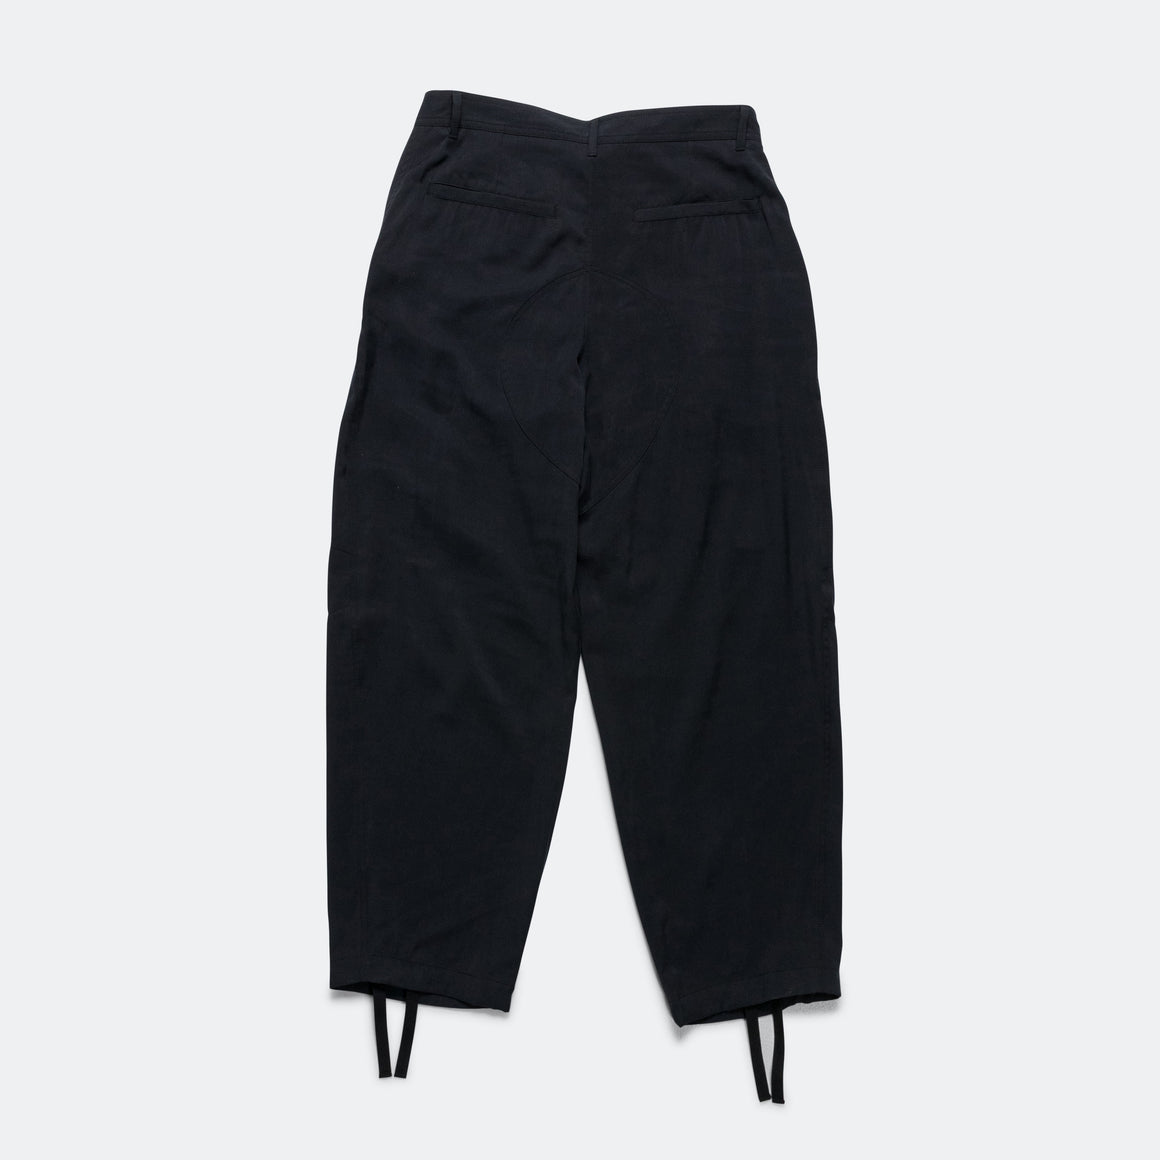 4SDesigns - Over Pant - 10oz Black Viscose/Poly Twill - UP THERE